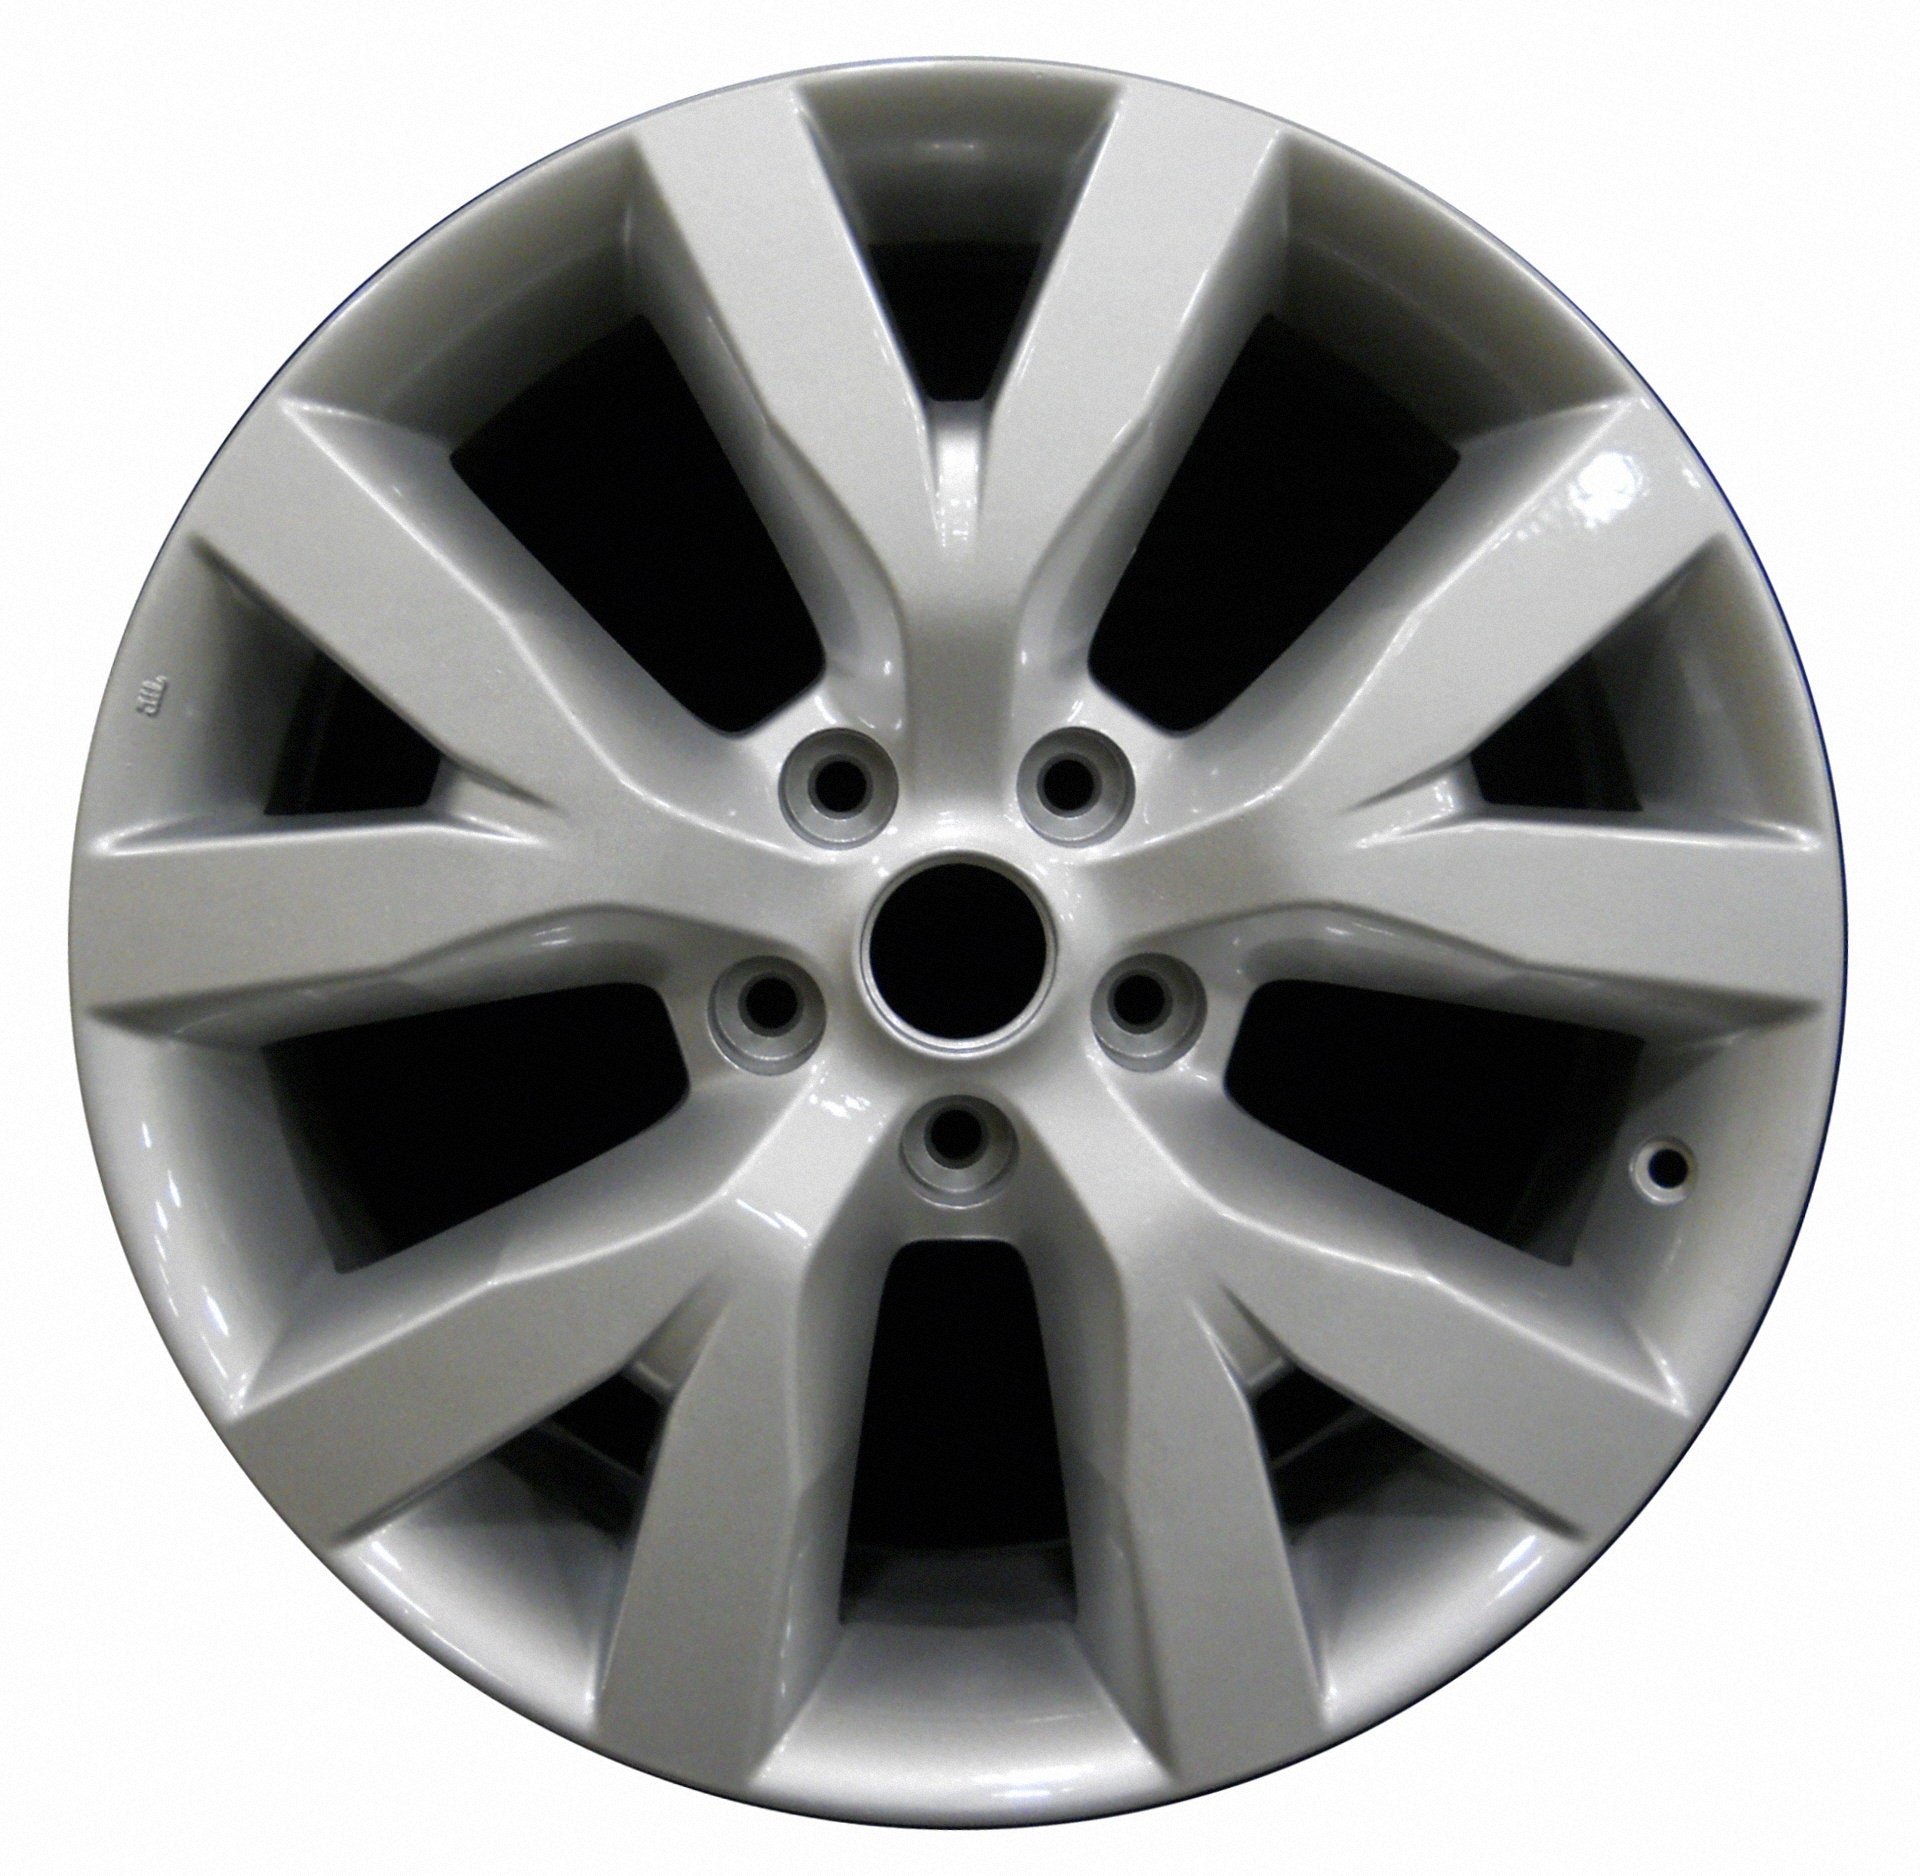 Nissan Murano  2011, 2012, 2013, 2014 Factory OEM Car Wheel Size 18x7.5 Alloy WAO.62562.PS12.FF